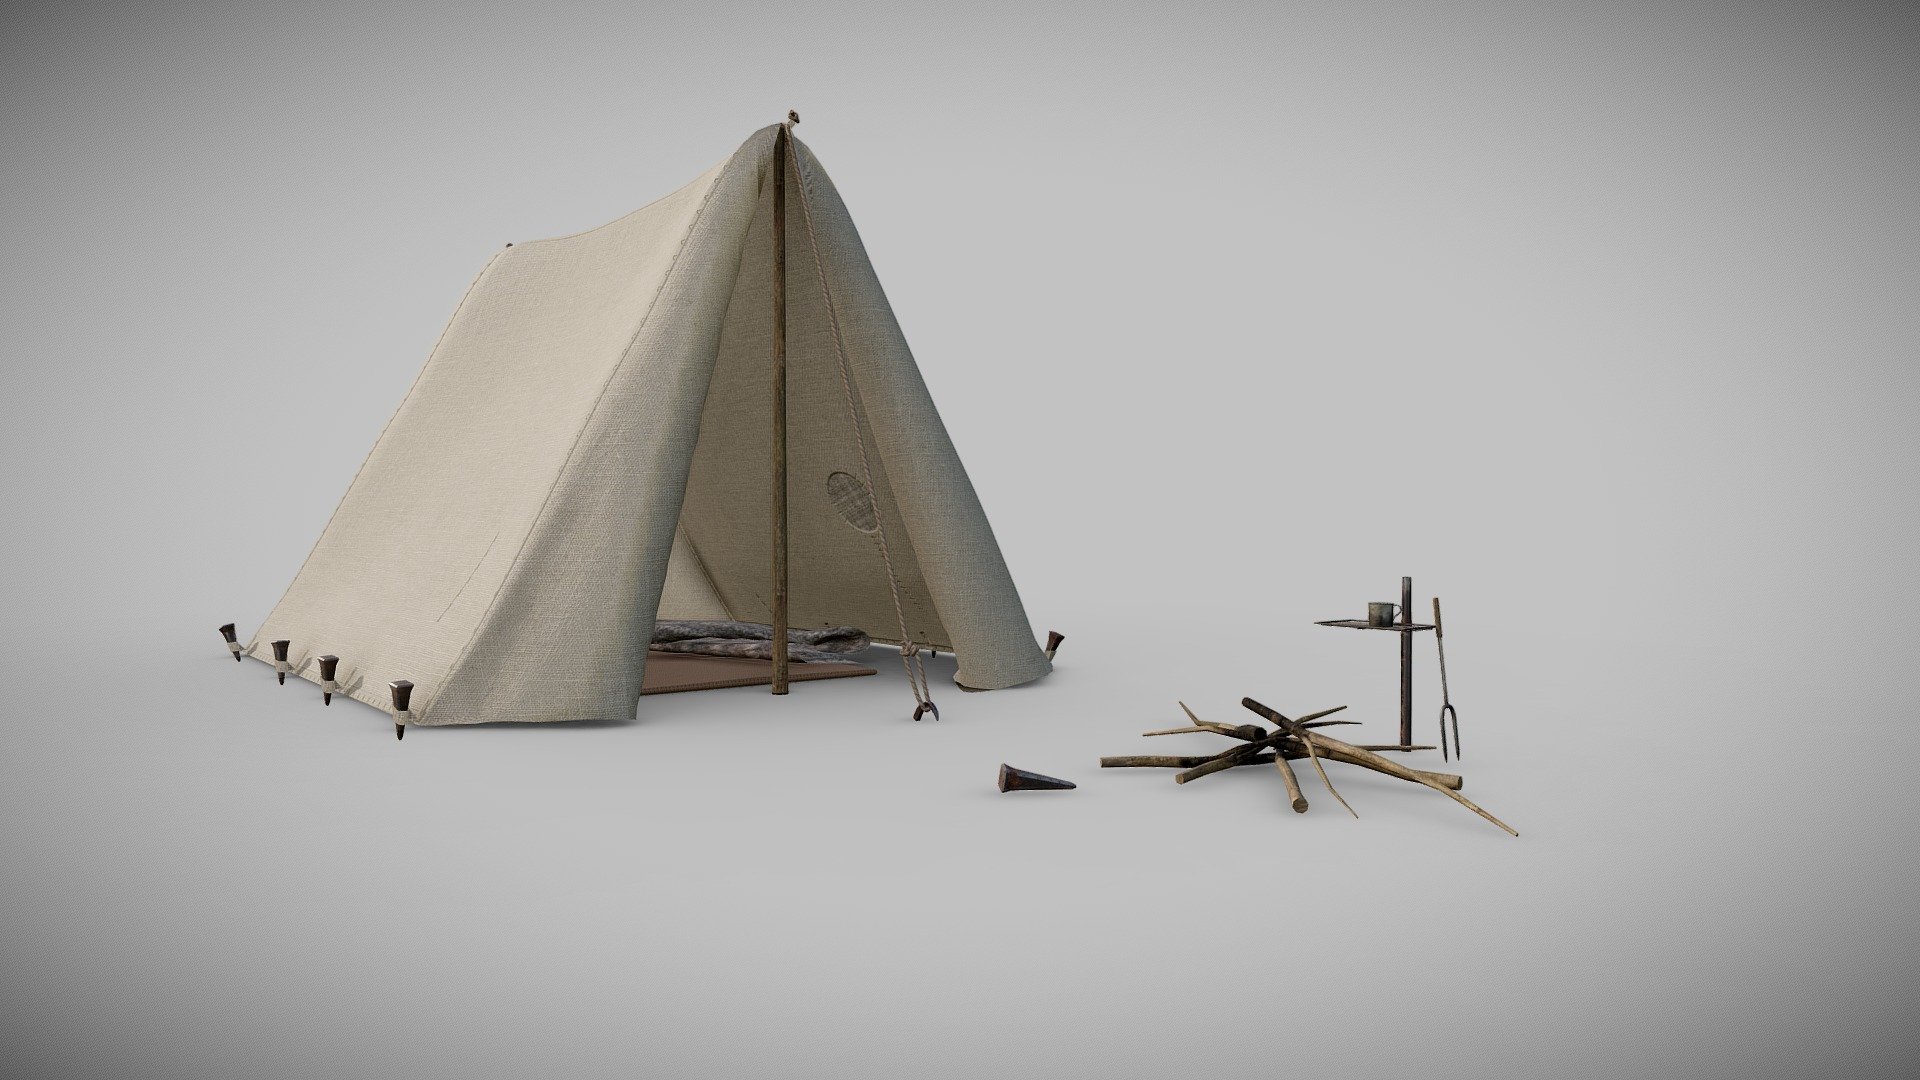 Details:

Game Ready Asset

LODs

4K textures

Vertex color for wind animation 

Contact me for any issue or questions https://www.artstation.com/bpaul/profile - Camping Tent - Buy Royalty Free 3D model by Paul (@nathan.d1563) 3d model